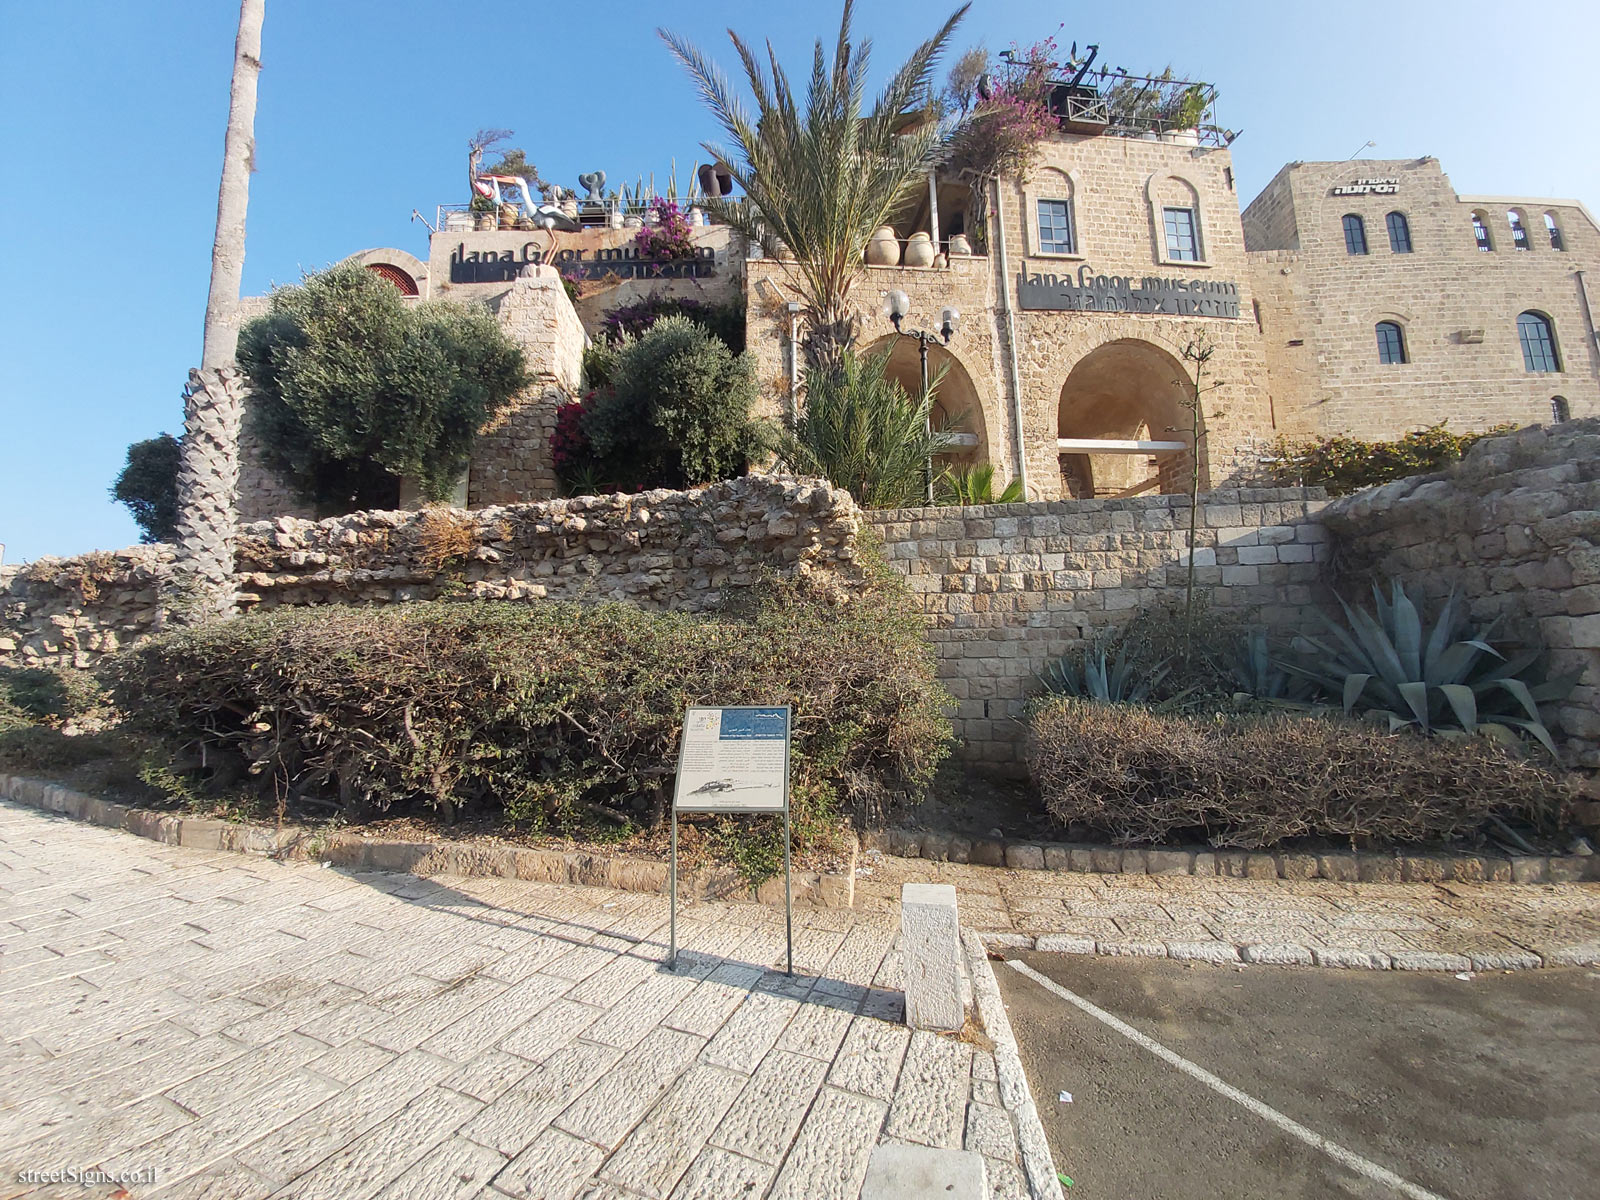 Old Jaffa - Remains of the Southern Wall